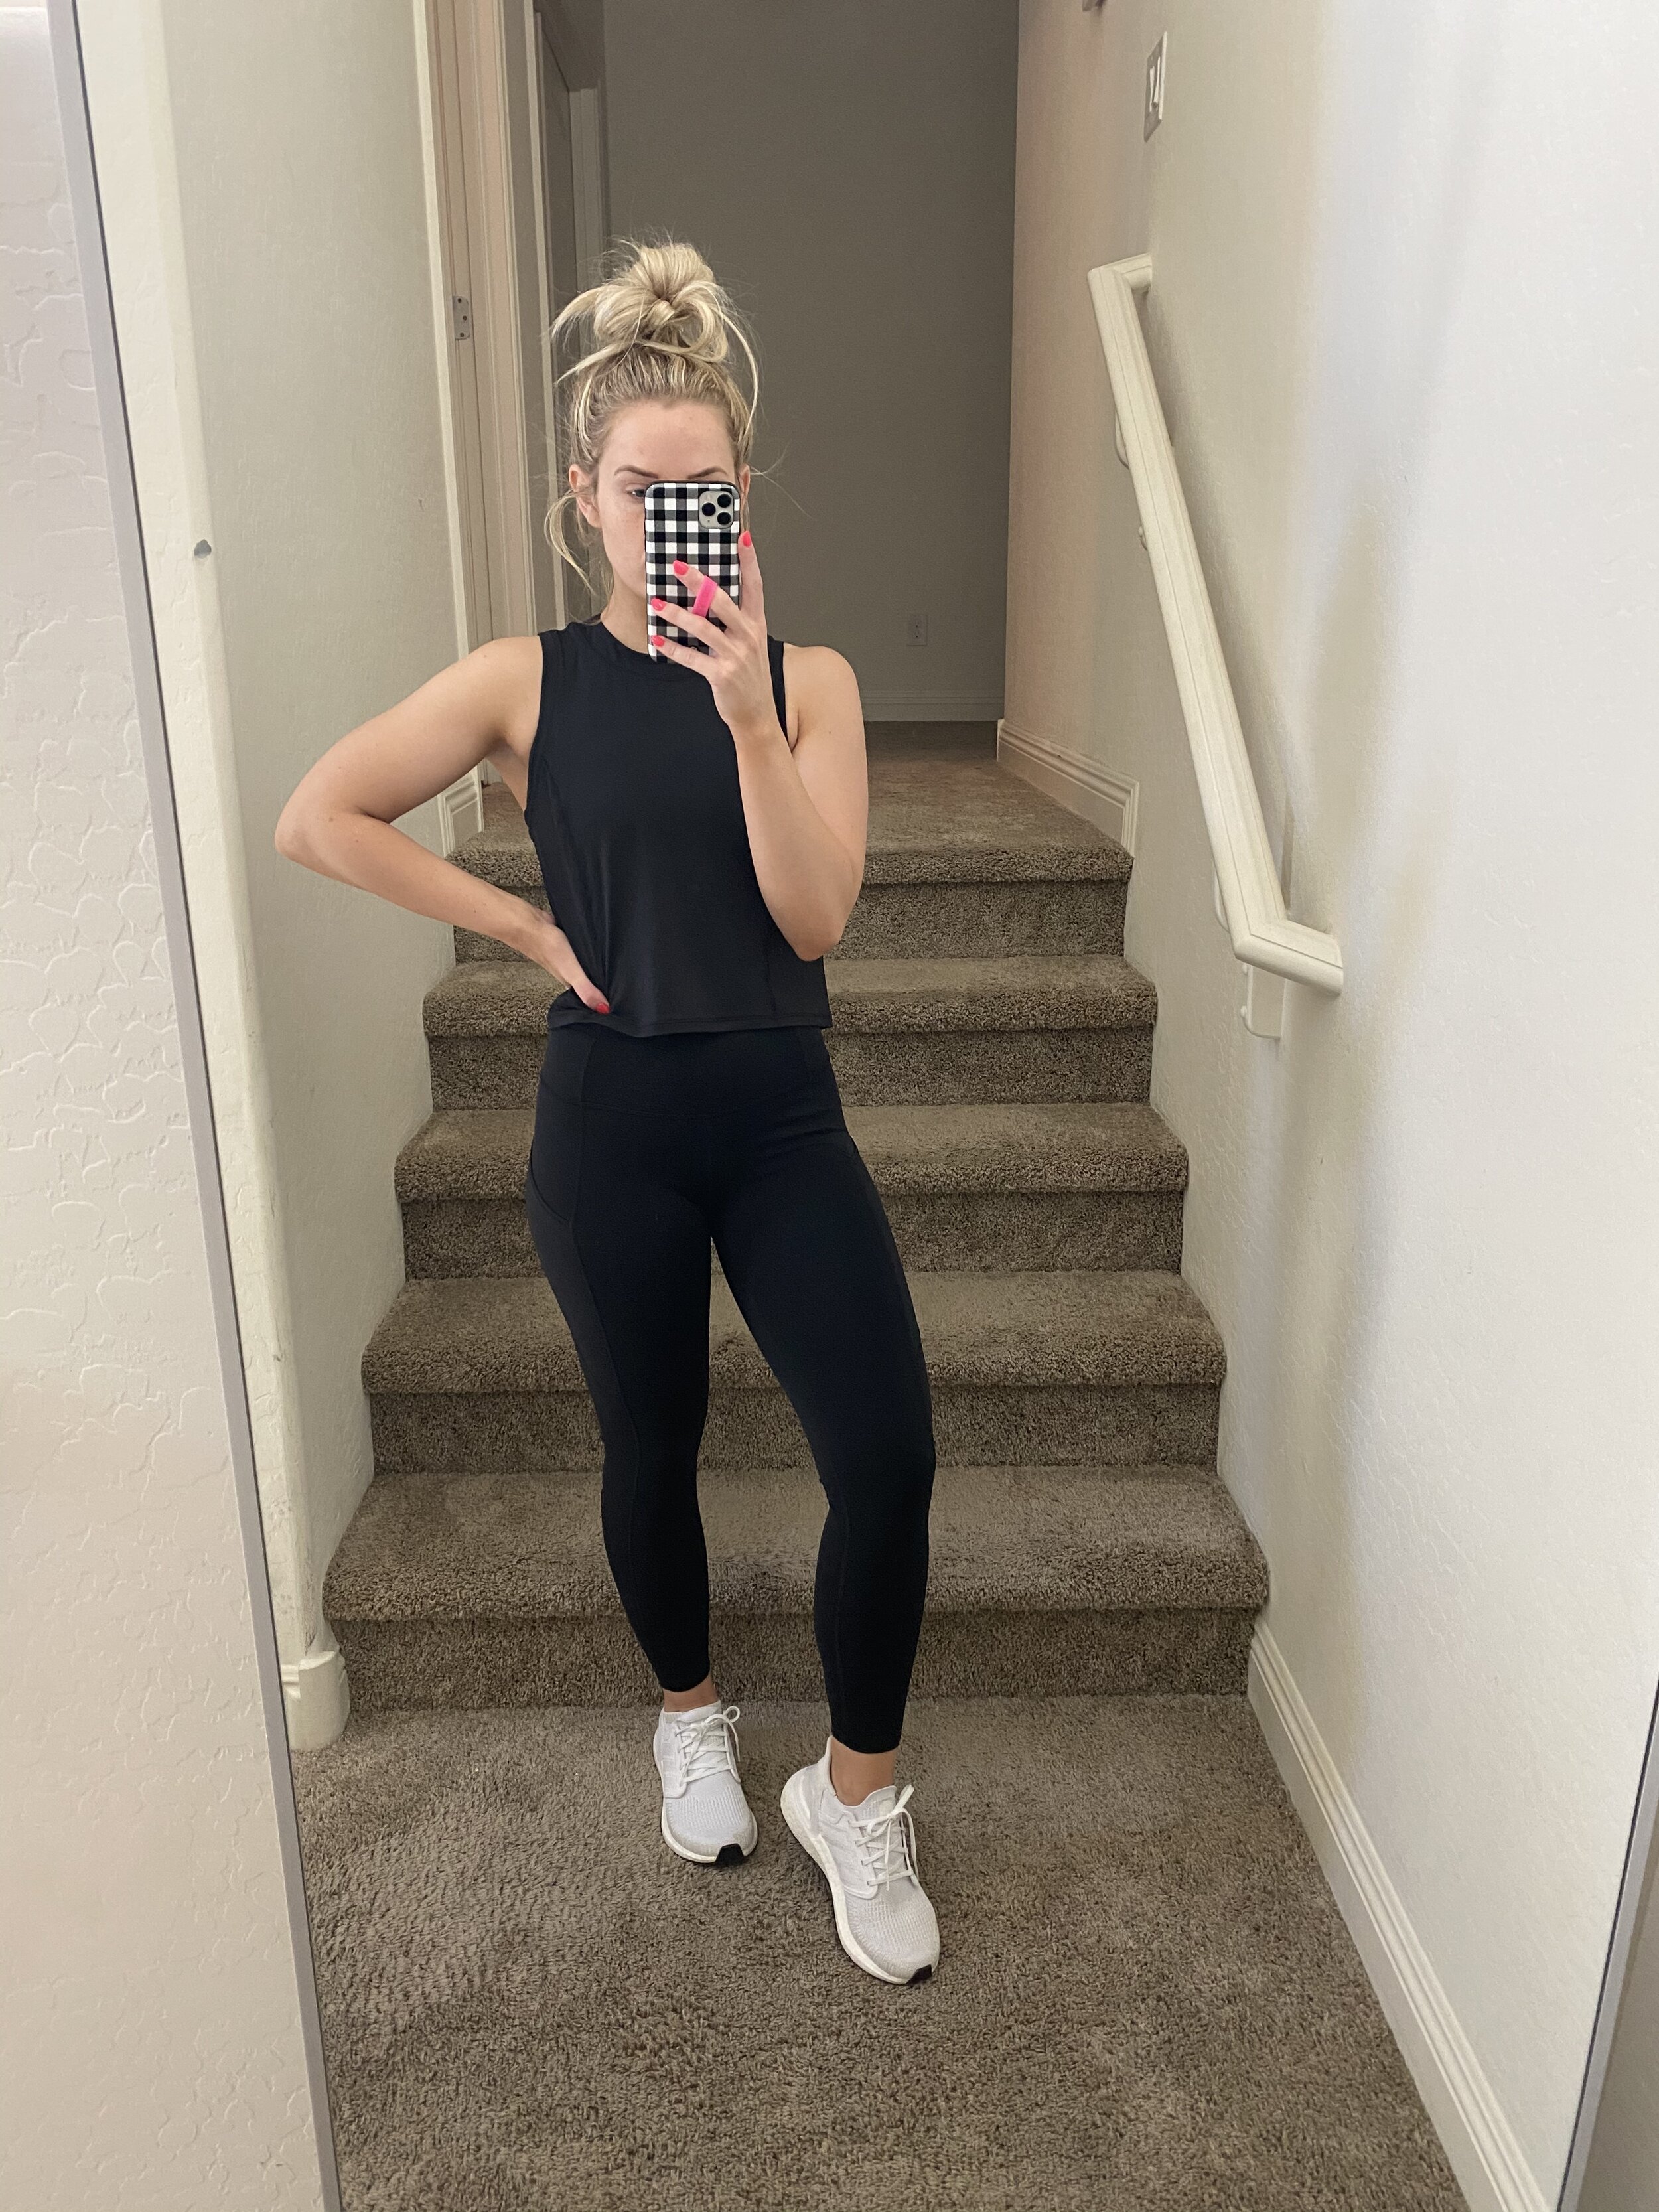 I hsve found the best lululemon legging dupes that are the best